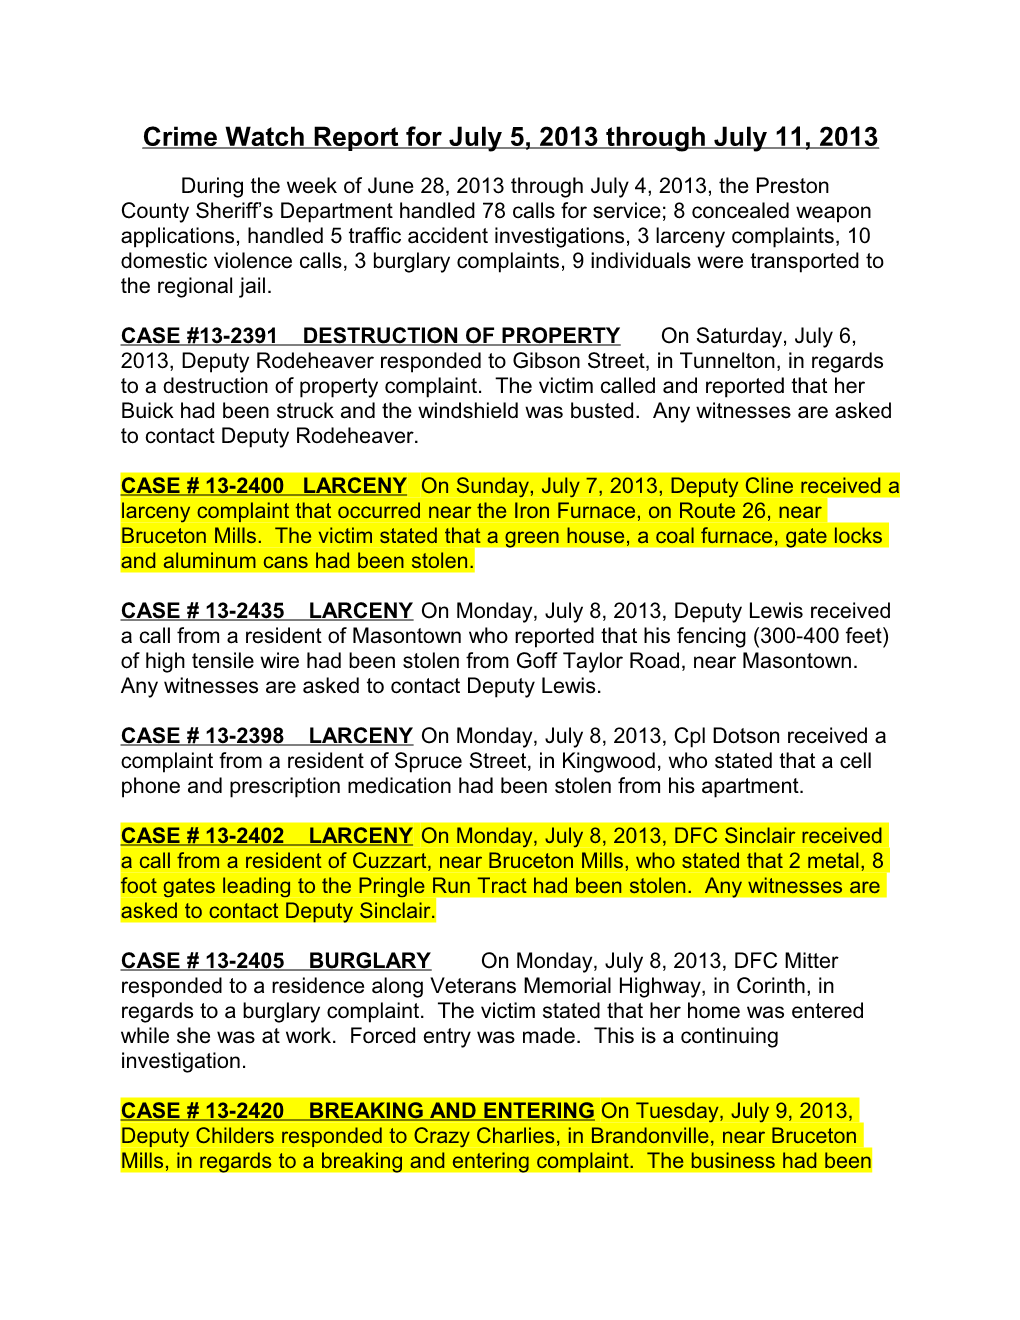 Crime Watch Report for July 5, 2013 Through July 11, 2013